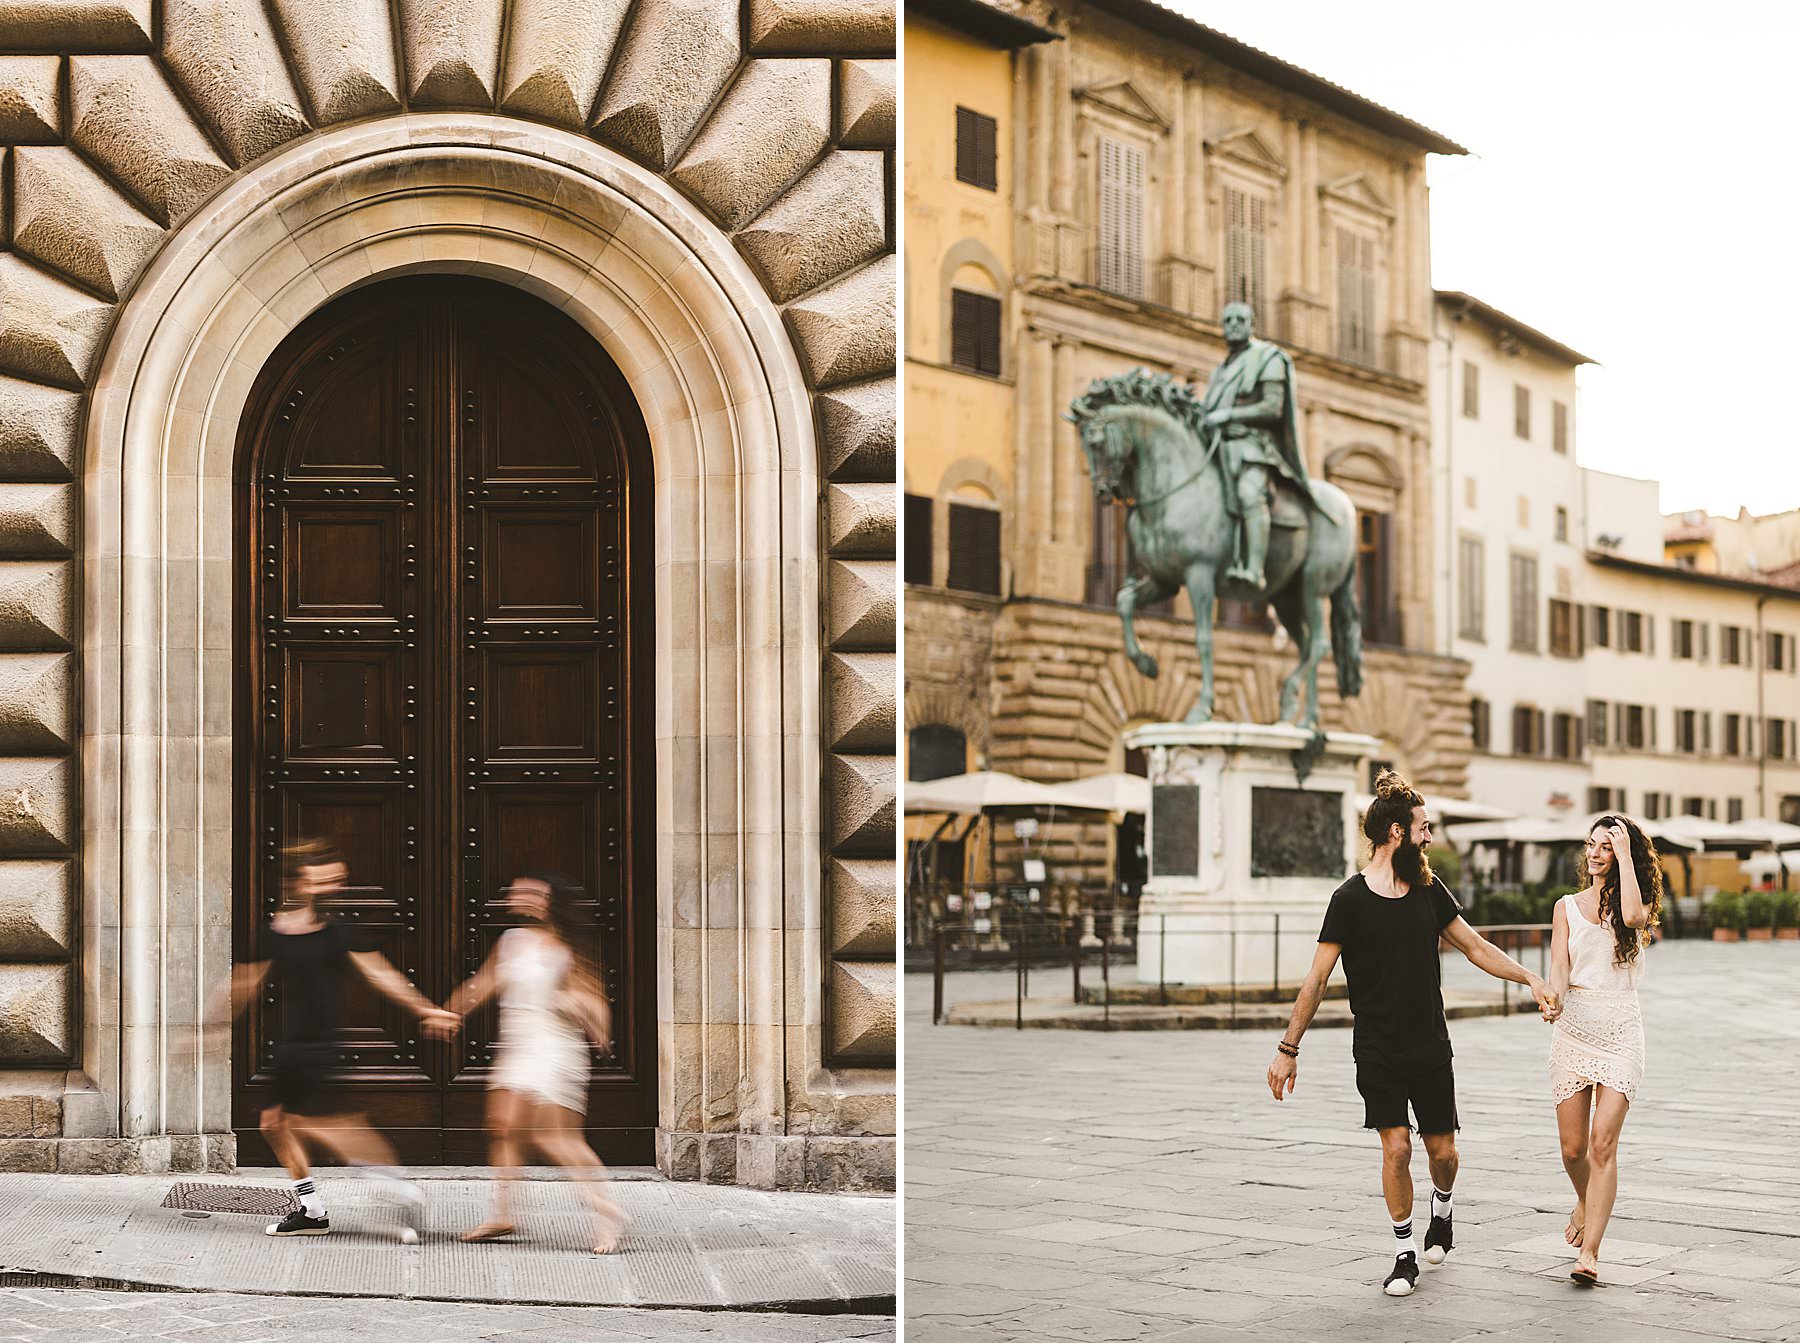 Exciting and fun couple portrait prewedding photo session in the heart of Florence, Italy at sunrise